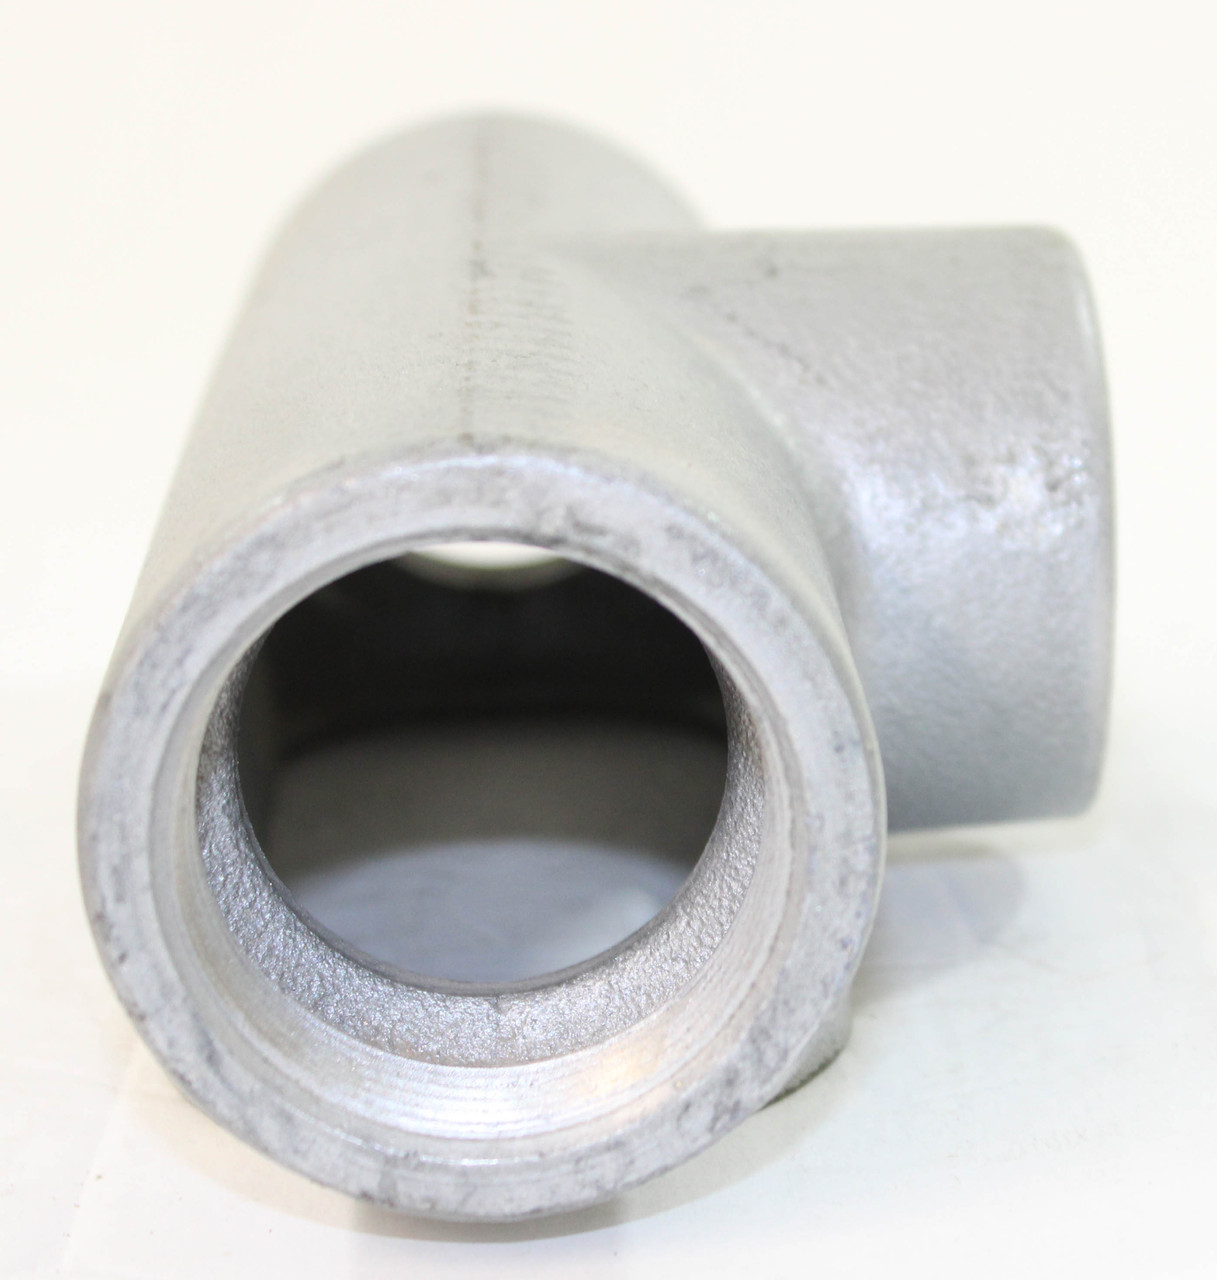 Eaton T57 Conduit Body 1-1/2 Inch Crouse-Hinds series Form 7 Feraloy Iron Alloy